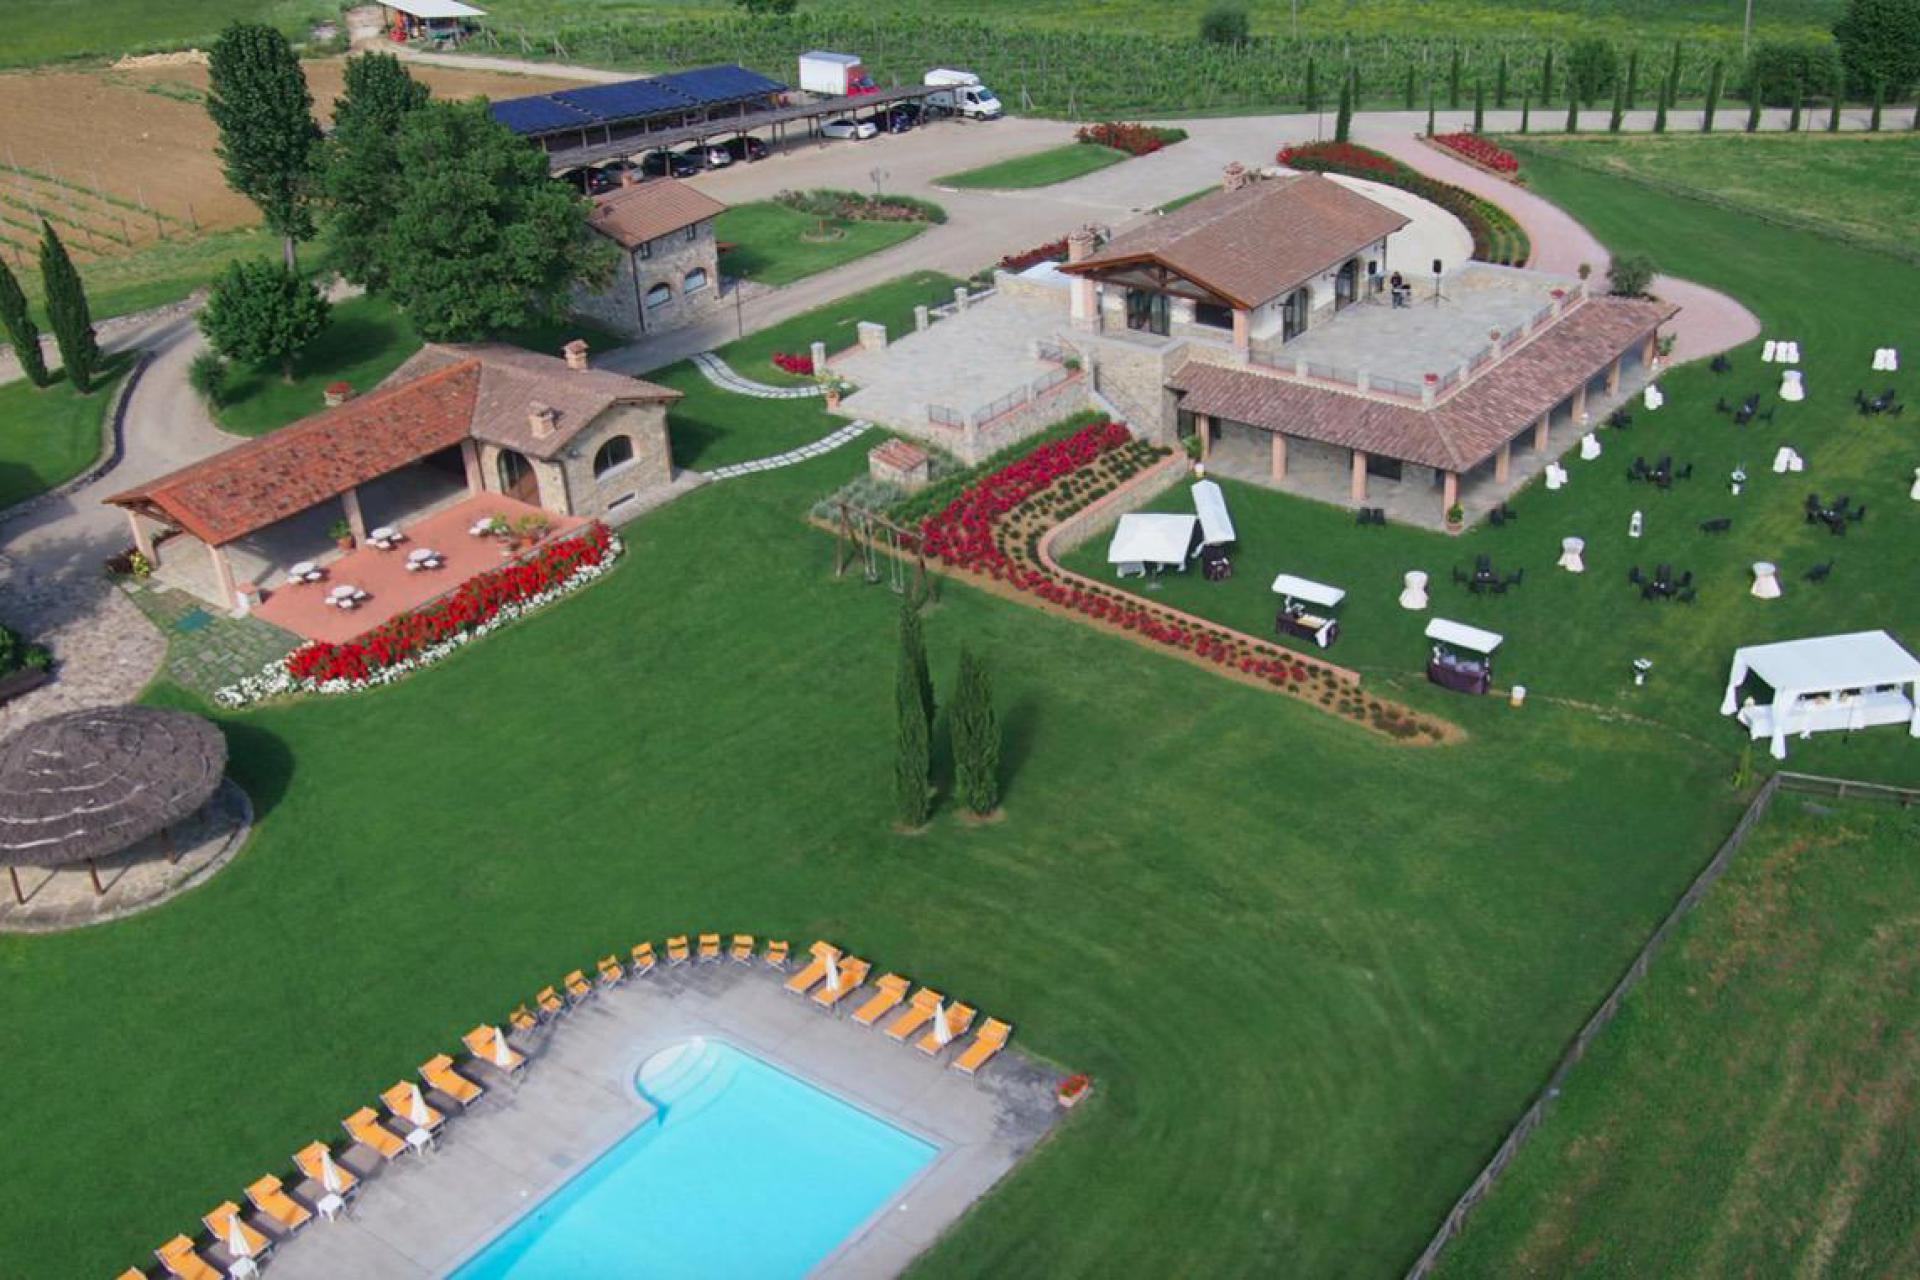 Beautiful Agriturismo - Farmhouse in Tuscany with amazing view!